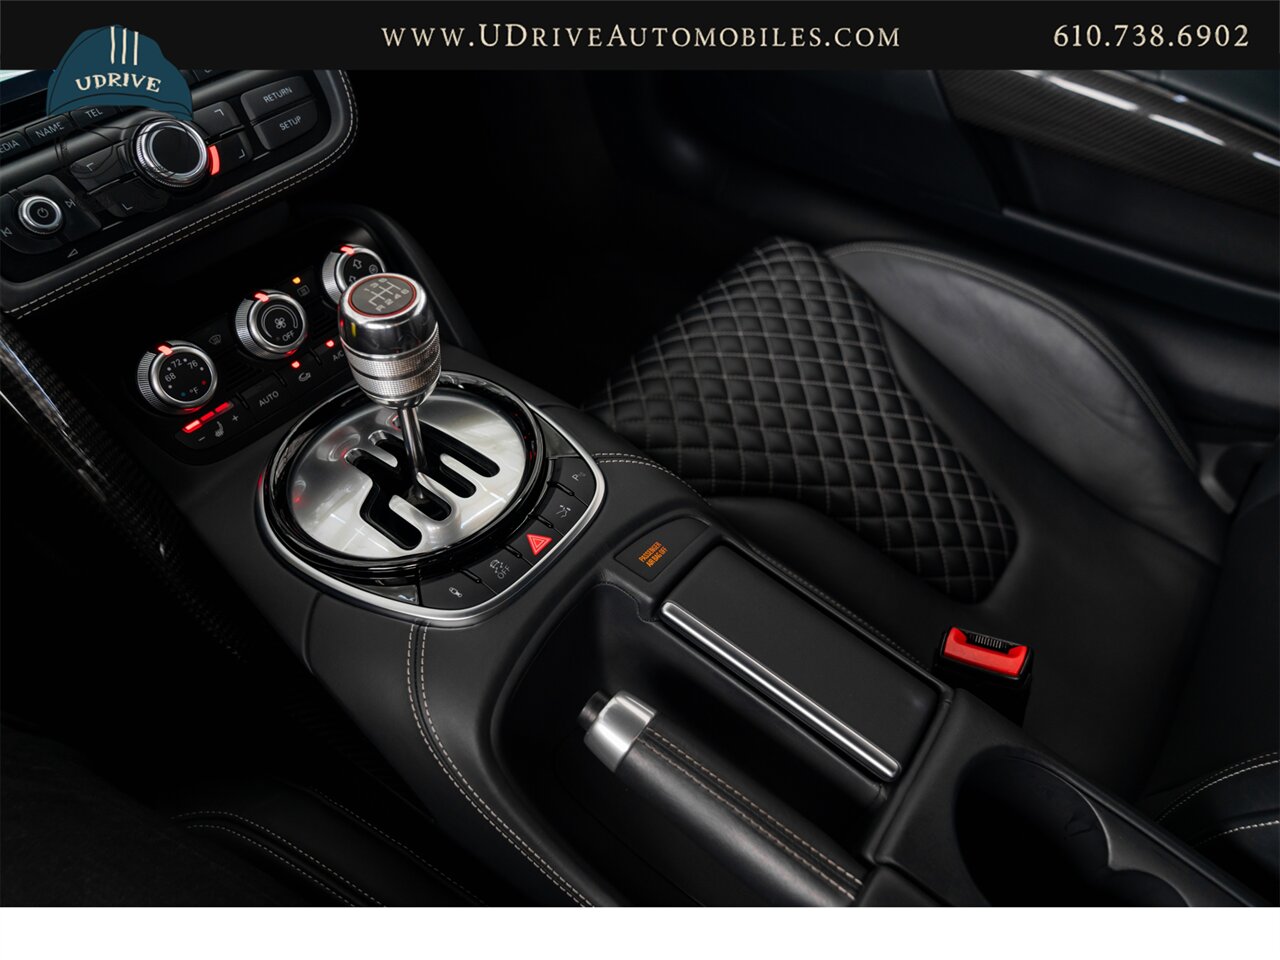 2015 Audi R8 5.2 V10 Quattro 6 Speed Manual 10k Miles  Diamond Stitched Leather 1 of 2 - Photo 41 - West Chester, PA 19382